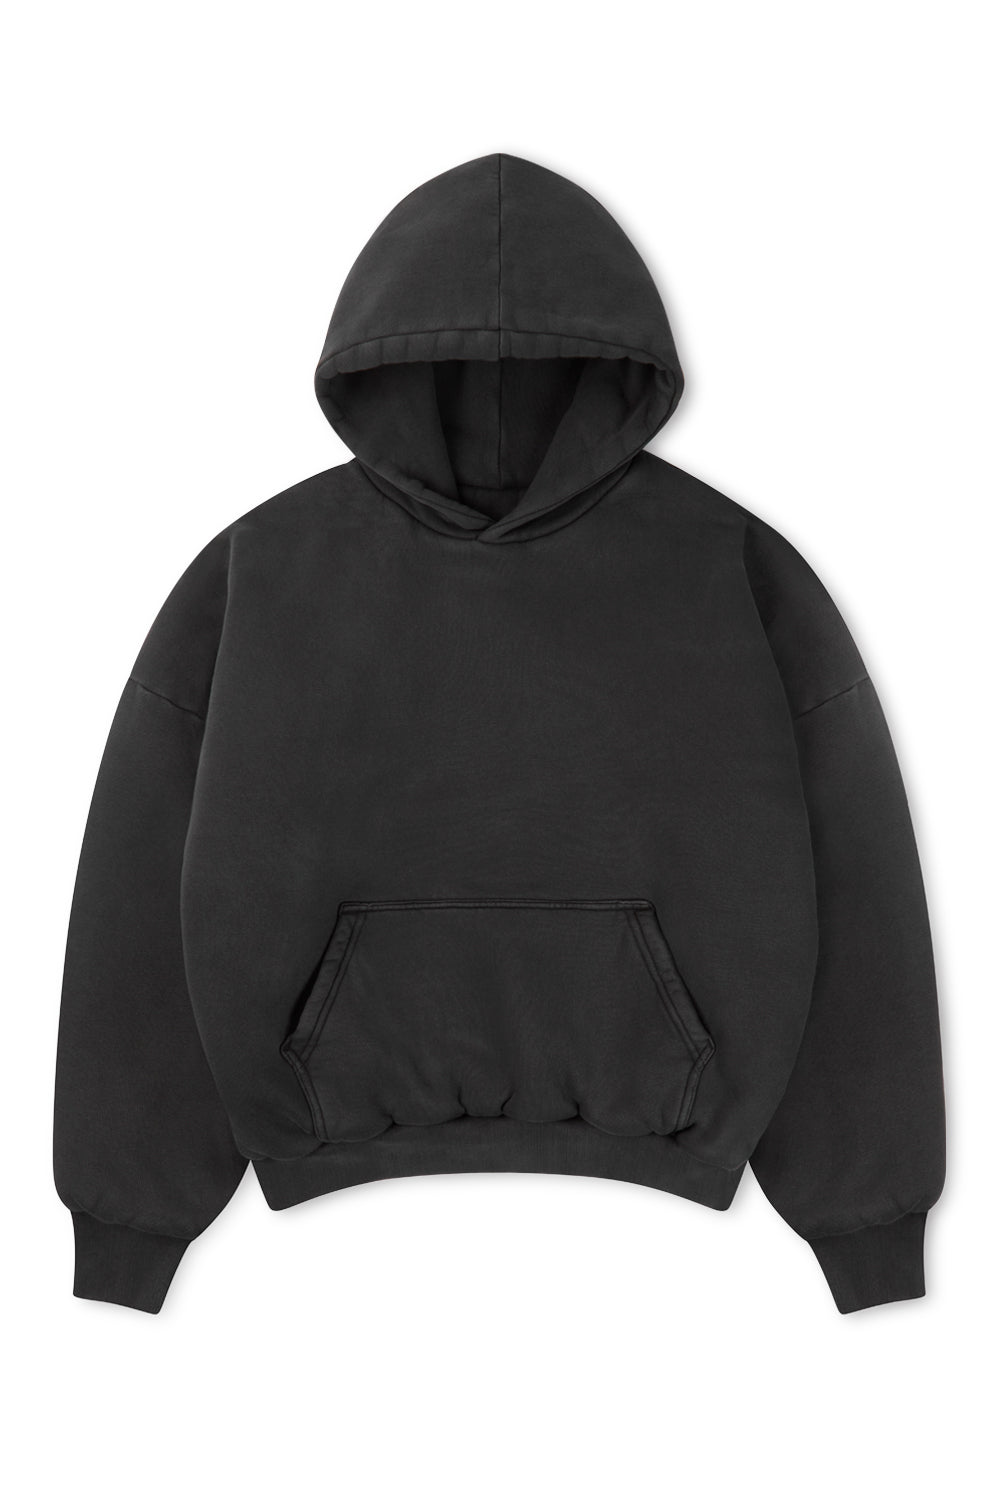 1000 GSM 'Mystery Box' Double Hoodie – Velour Garments